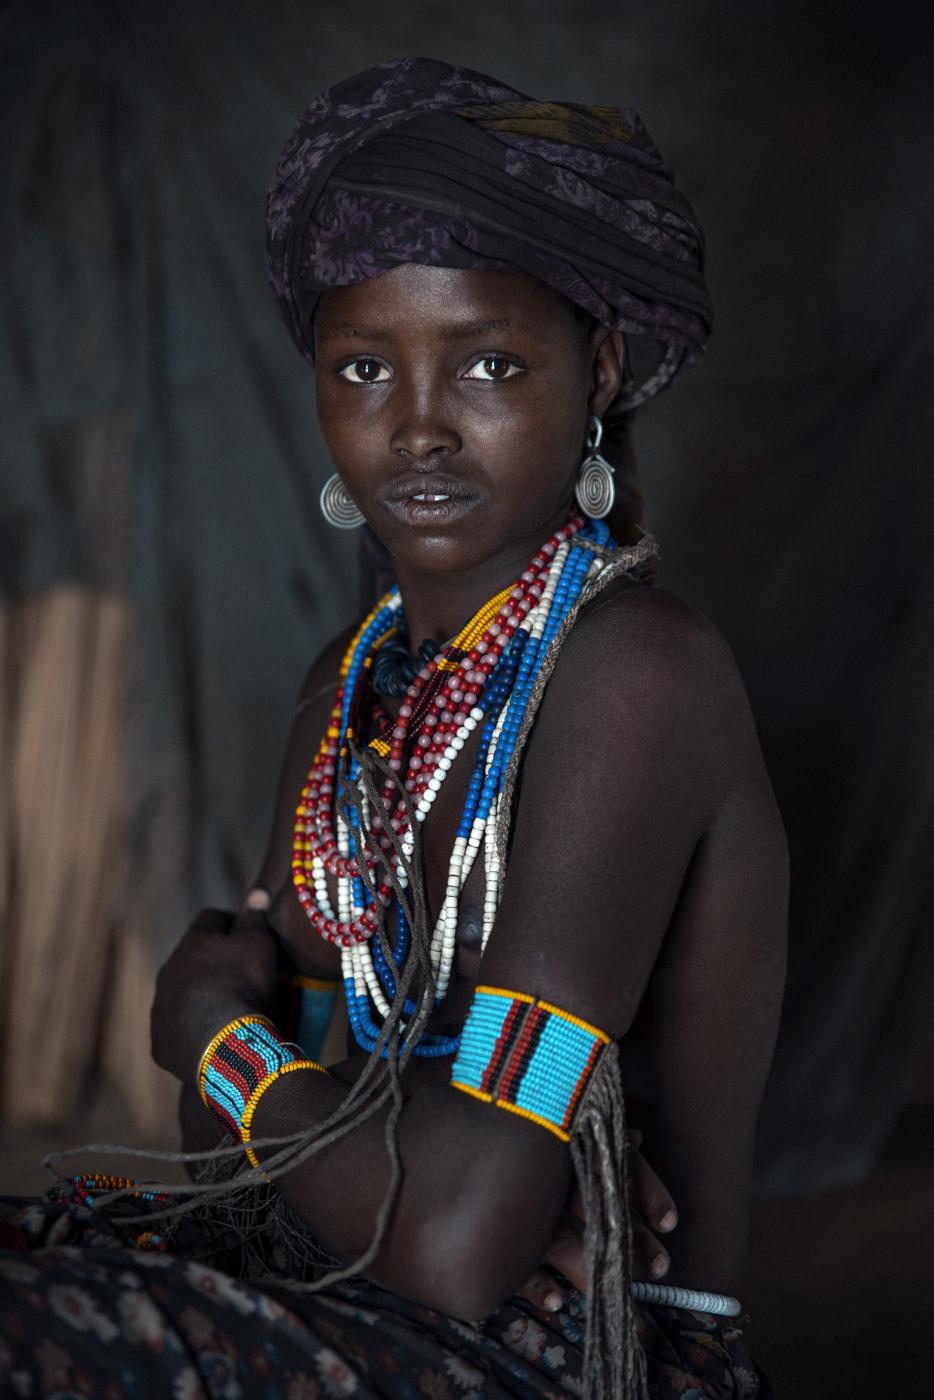 Arbore Girl | Buy this image